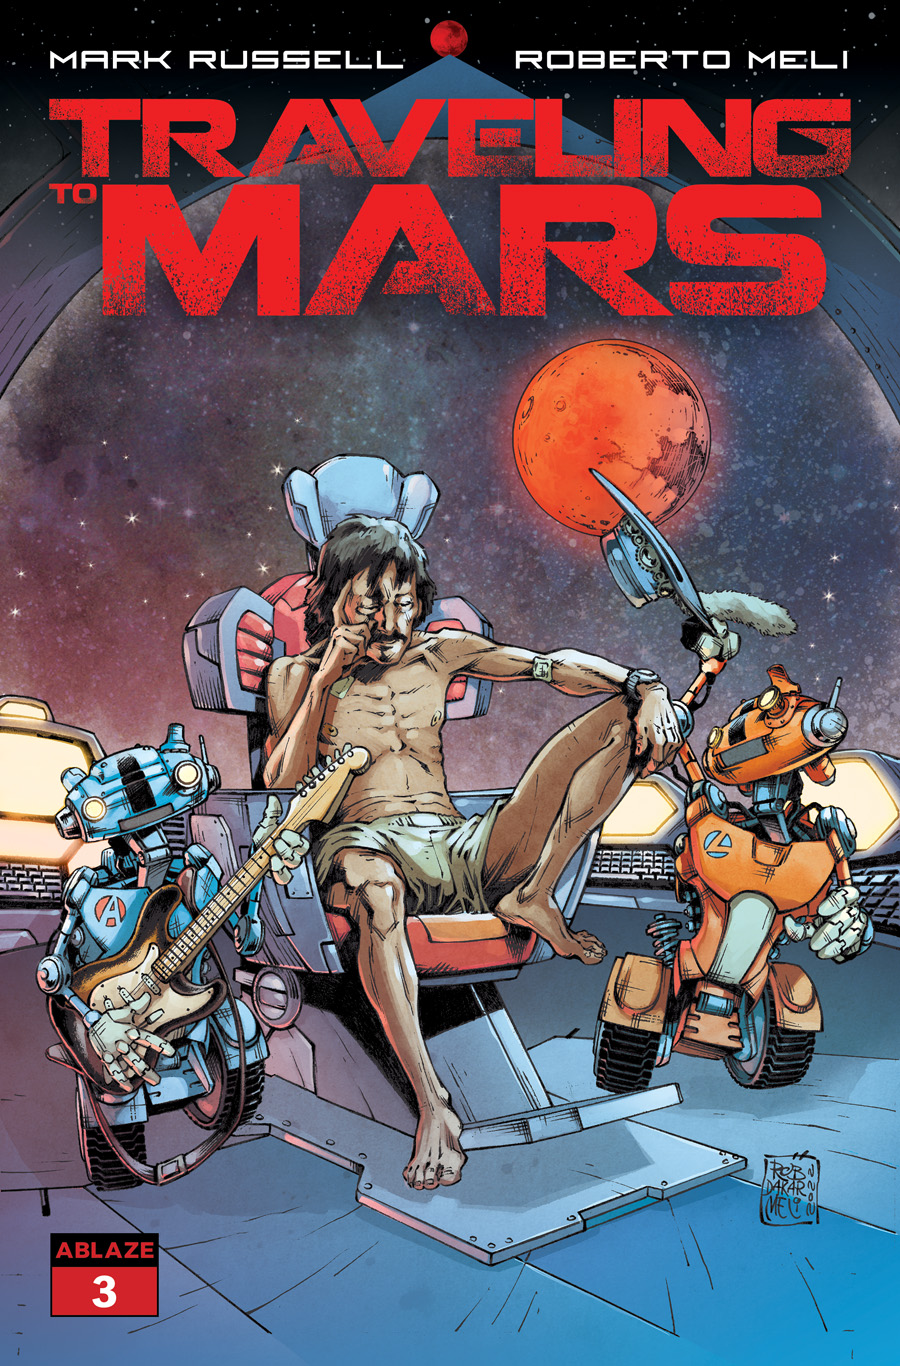 Mars Will Send No More, Comic books, art, poetry, and other obsessions